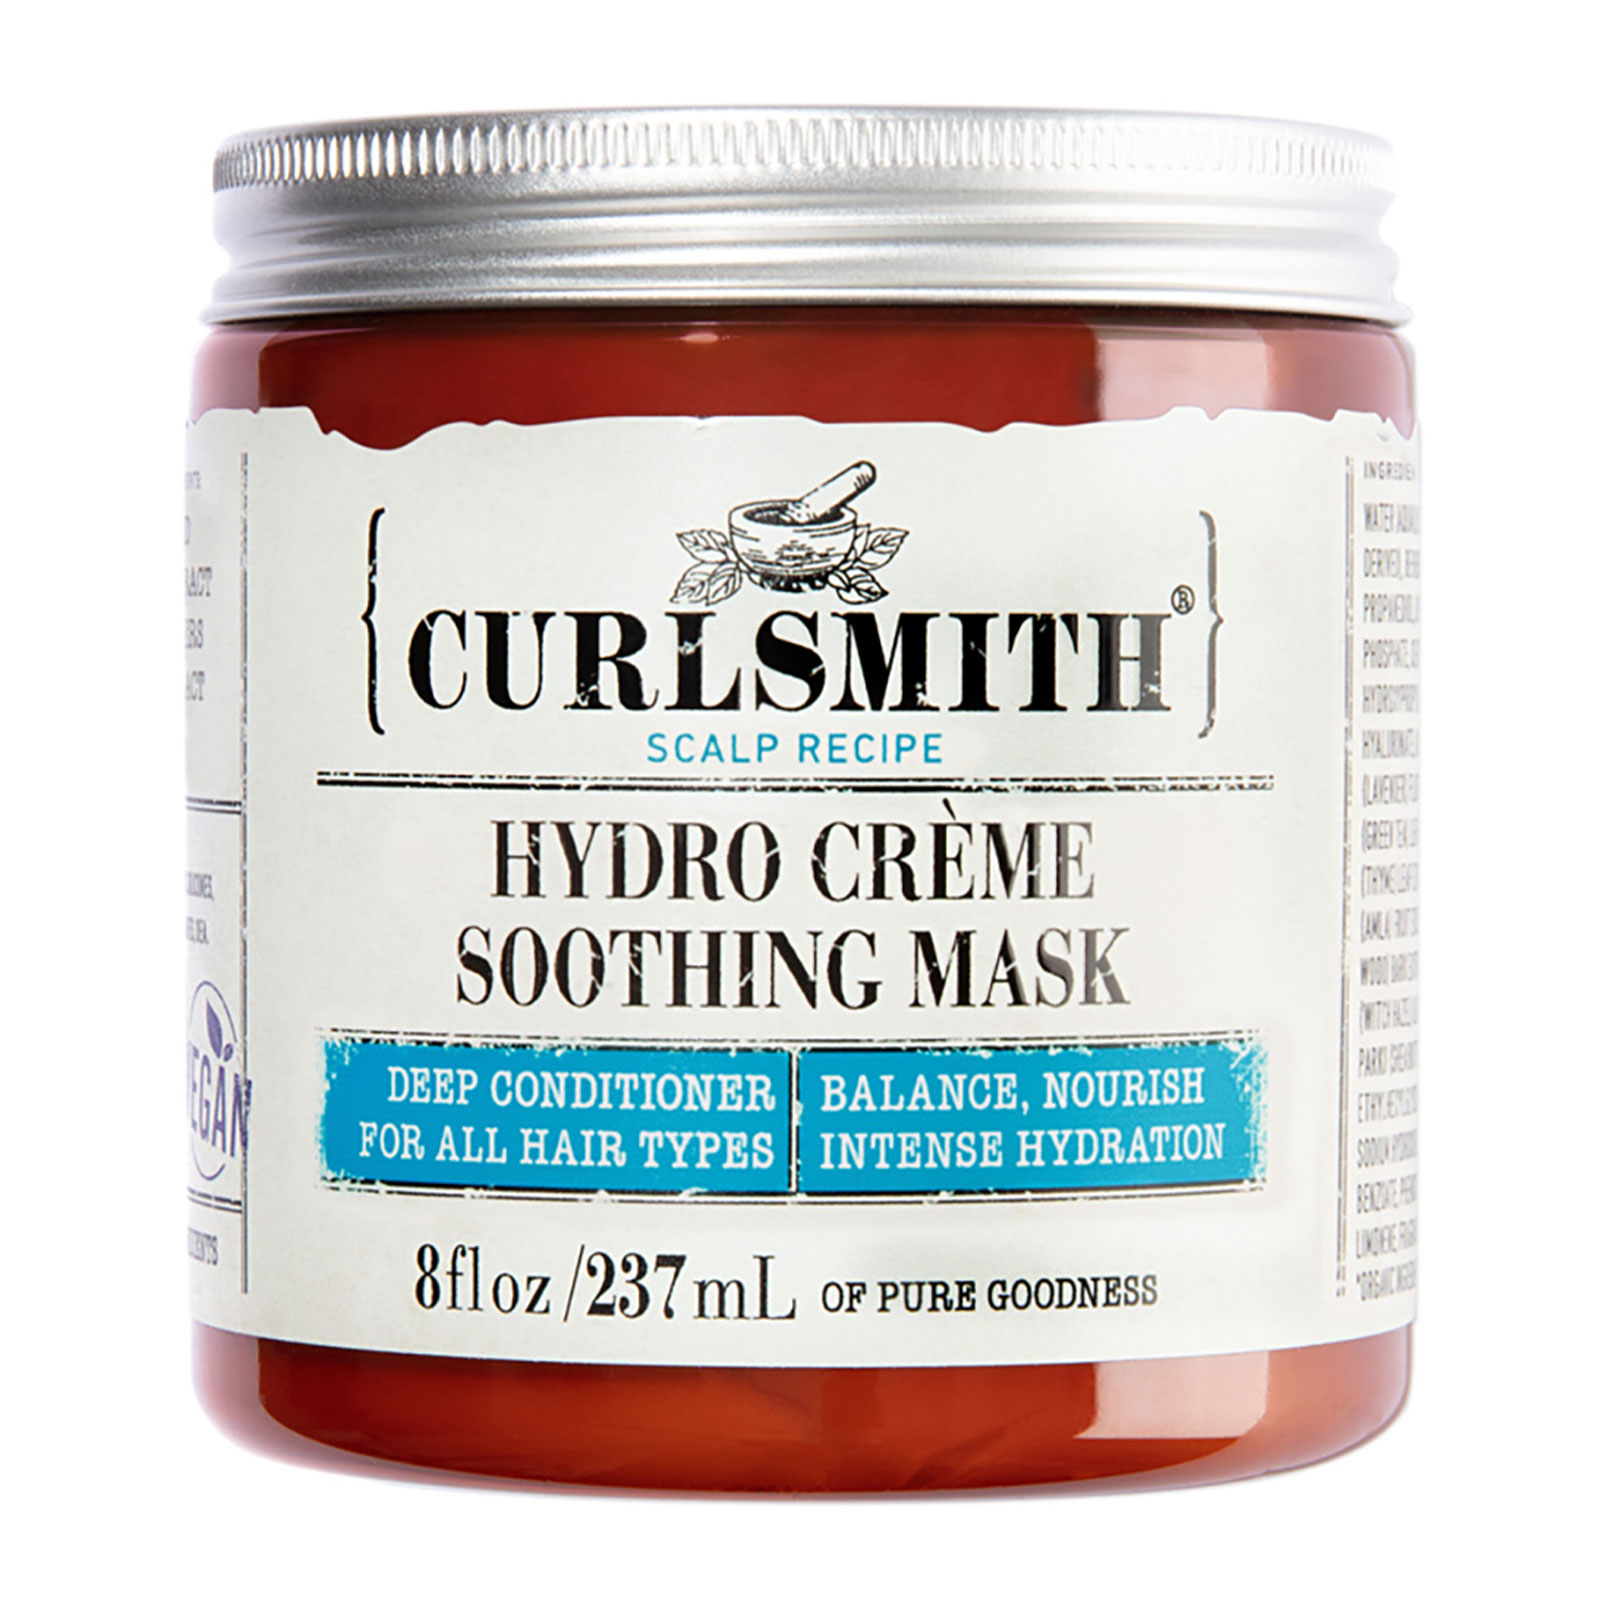 Curlsmith Scalp Hydro Creme Soothing Masque 237Ml